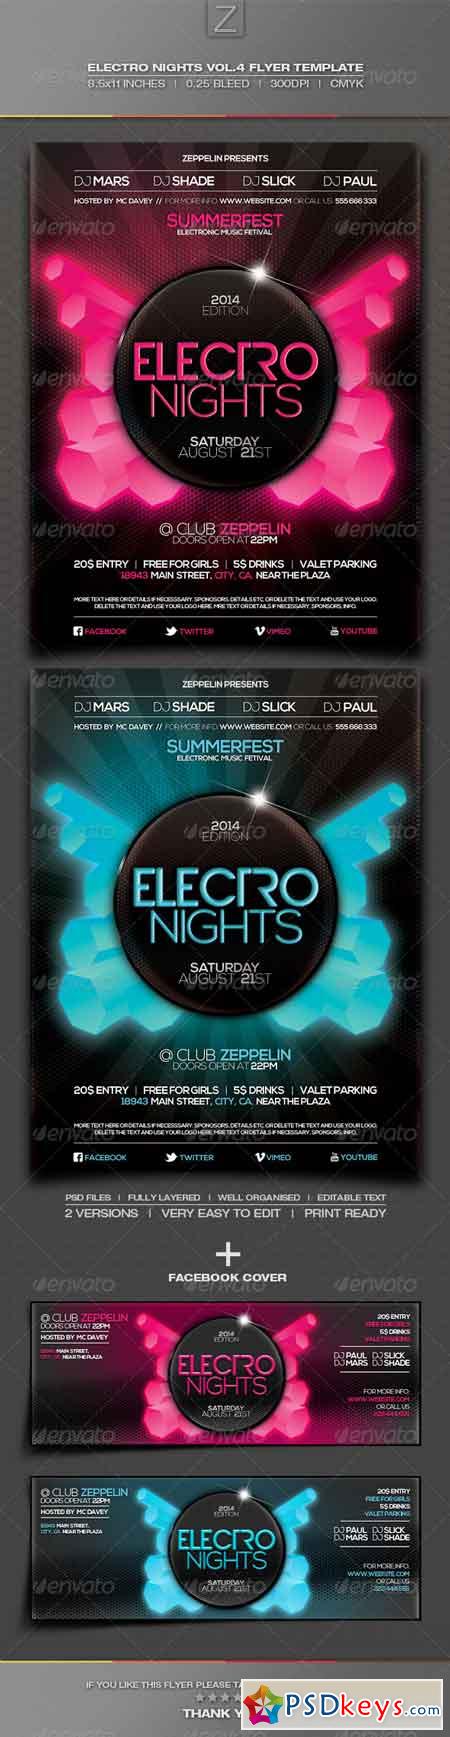 Electro Nights Vol.4 Flyer Template 6922851